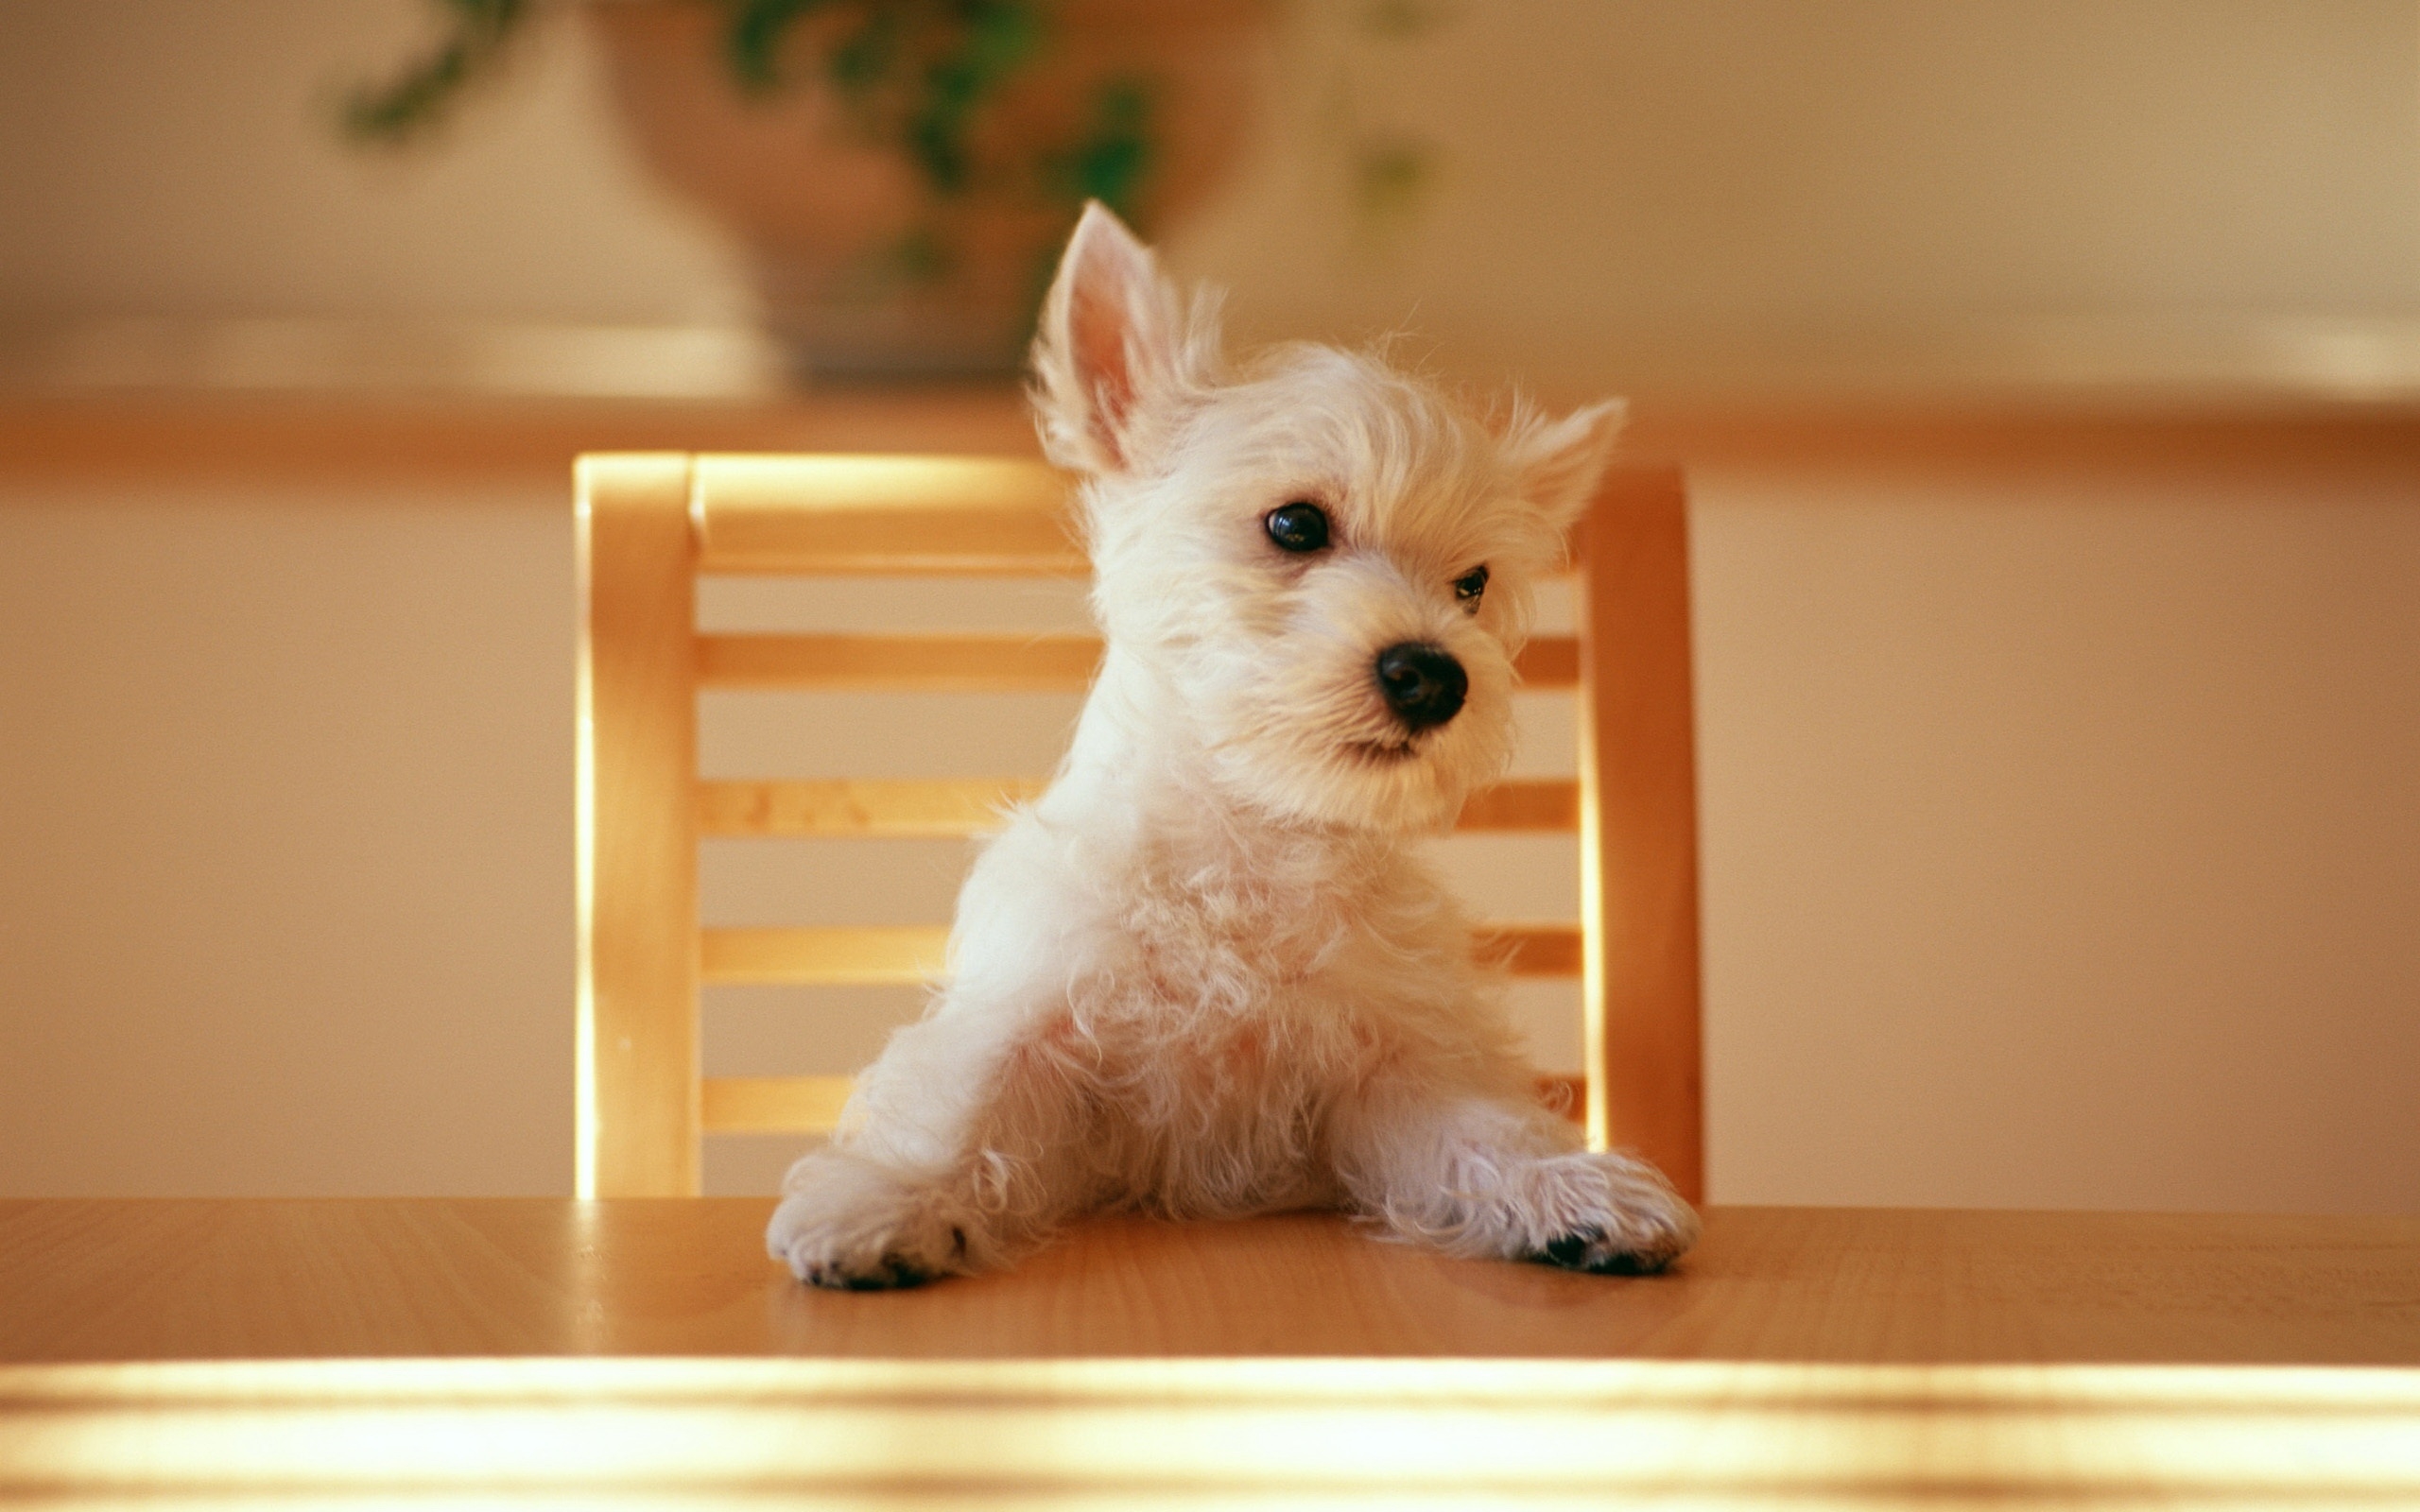 Dog at the table for 2560 x 1600 widescreen resolution